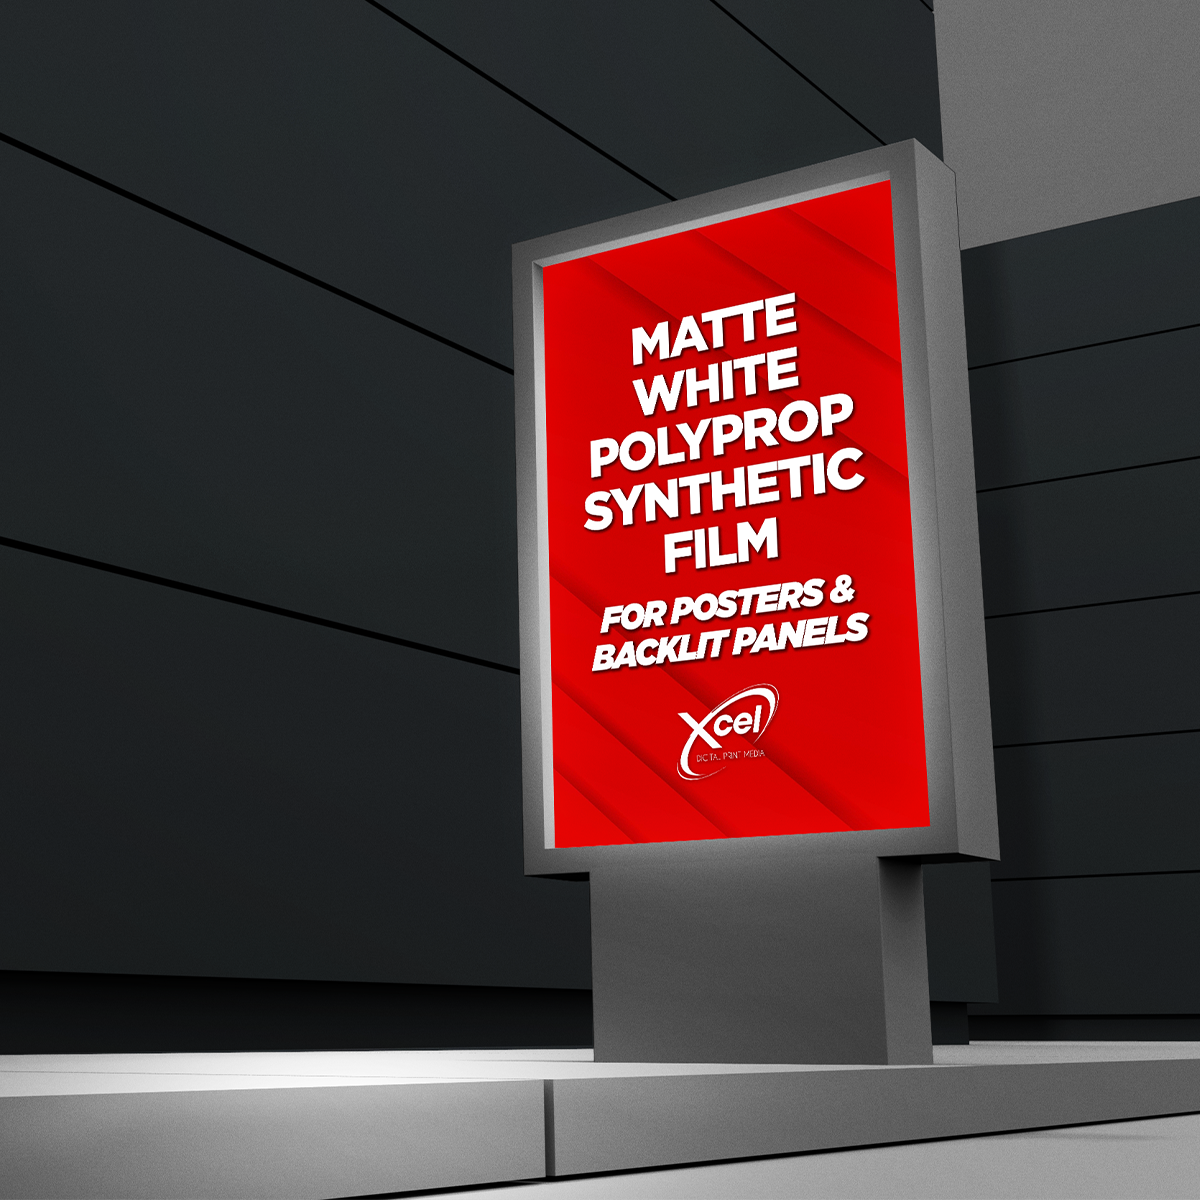 Matte White PolyProp Synthetic Film